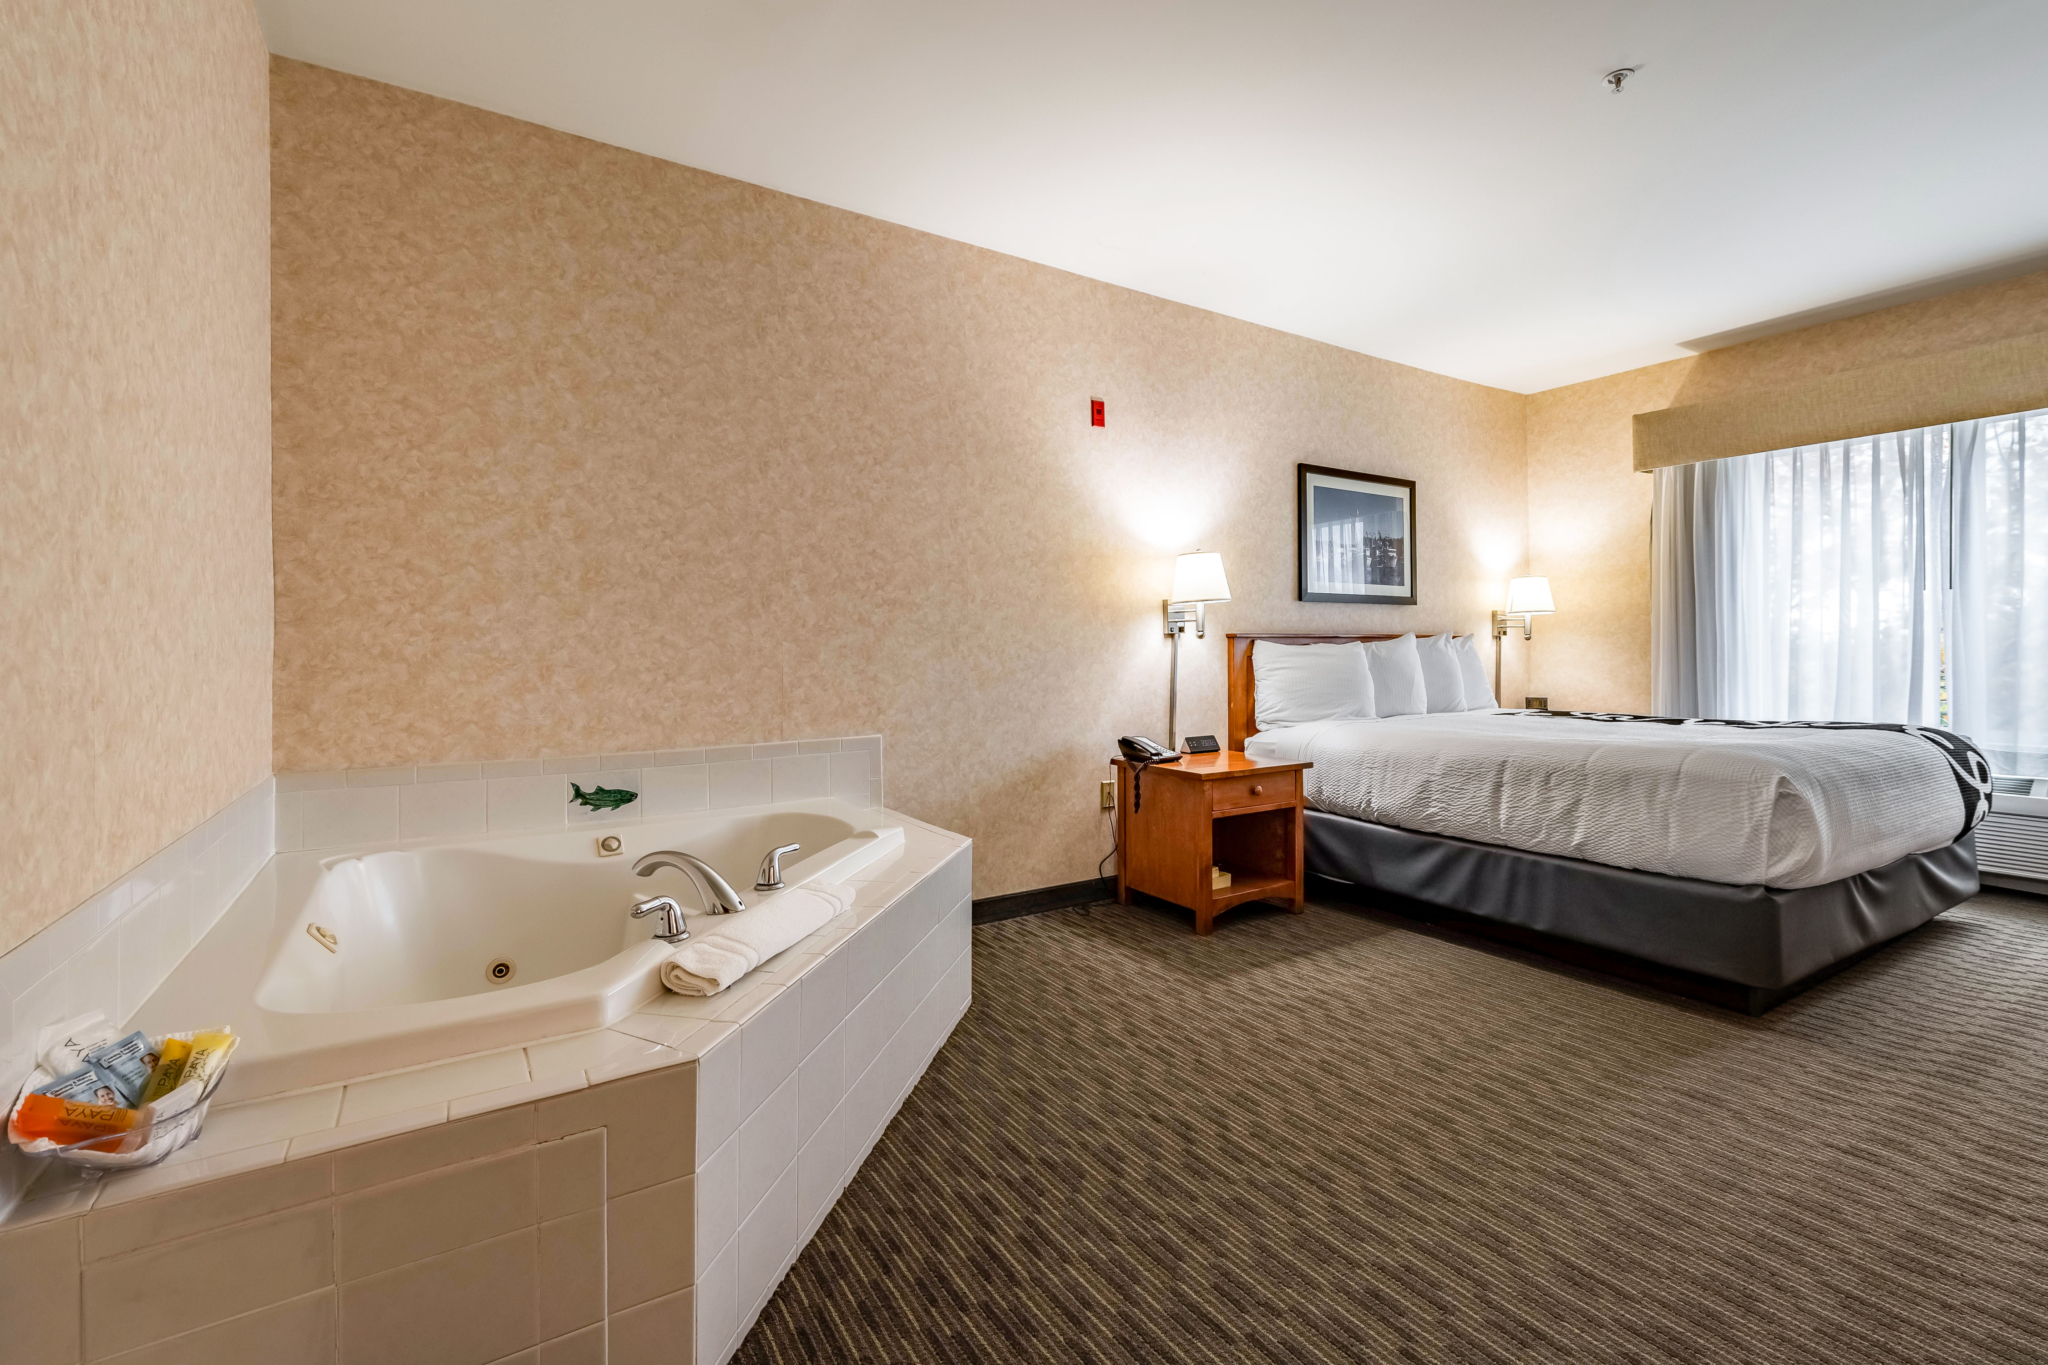 Hotel room with king bed and Jacuzzi tub.